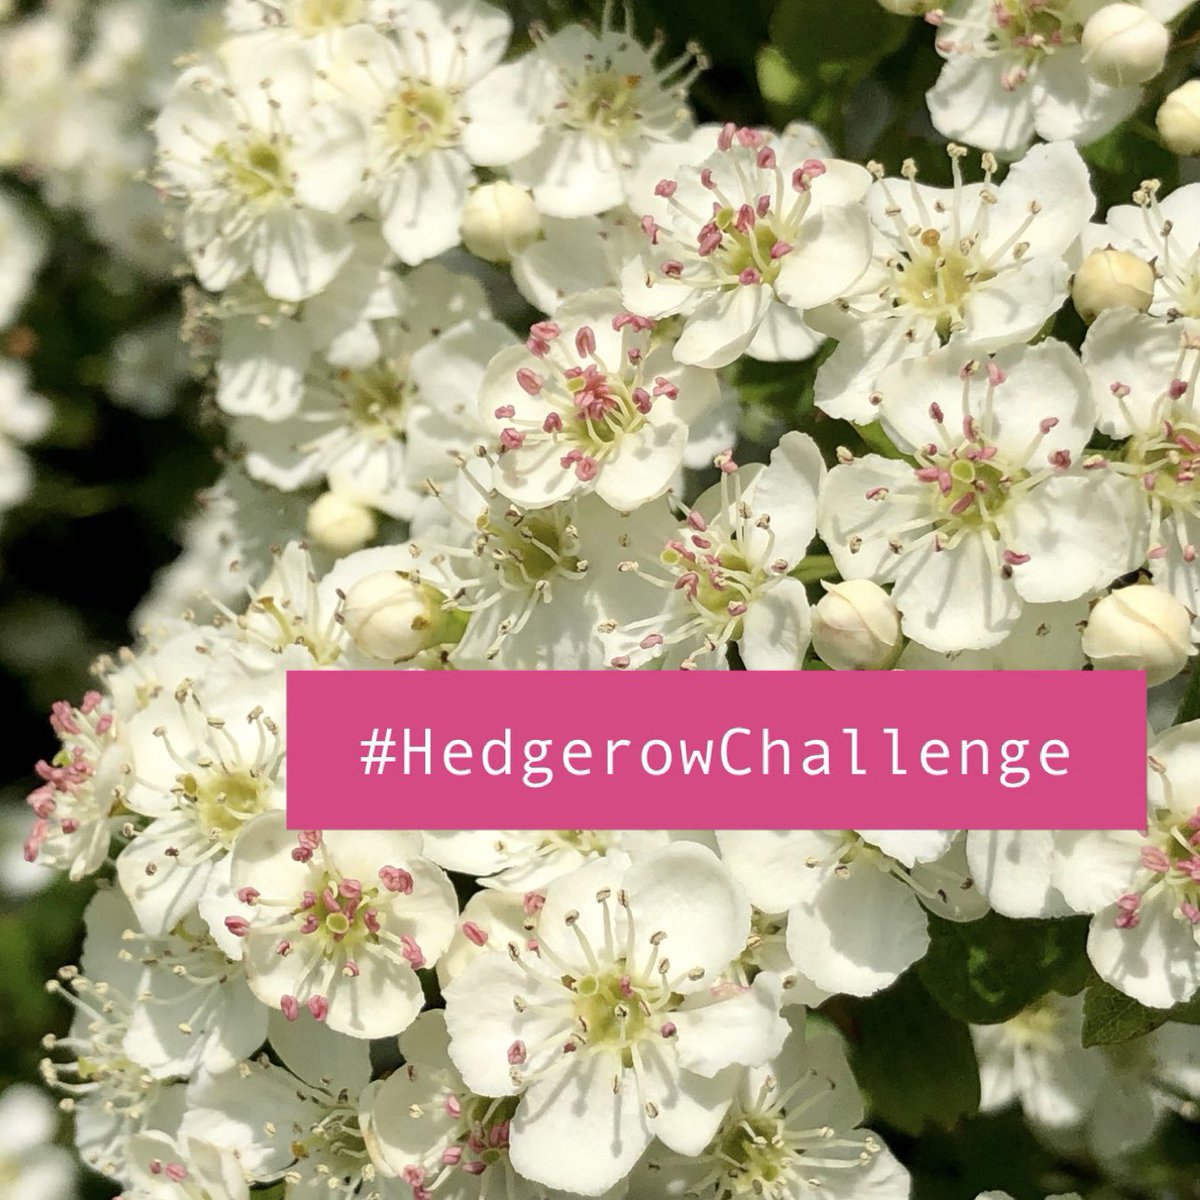 What can you find flowering in a hedgerow? That’s the challenge this week from @wildflower_hour! Have a good rummage in a hedge (get ready for the funny looks 👀) & share your pics for #WildflowerHour this Sunday 8-9pm using the hashtag #HedgerowChallenge! Happy hedge-diving!